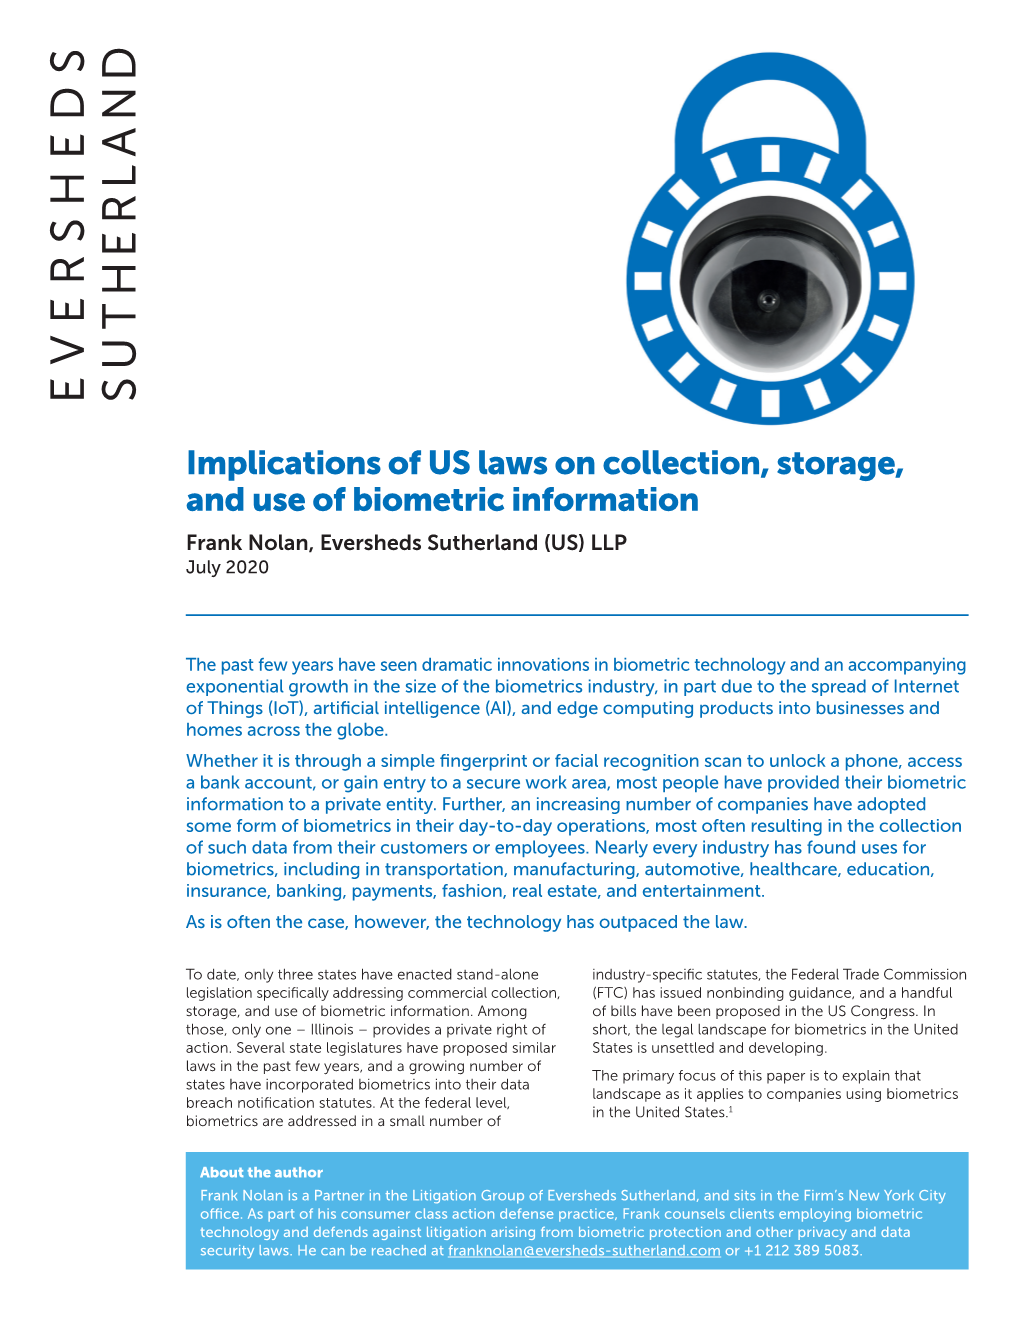 Implications of US Laws on Collection, Storage, and Use of Biometric Information Frank Nolan, Eversheds Sutherland (US) LLP July 2020